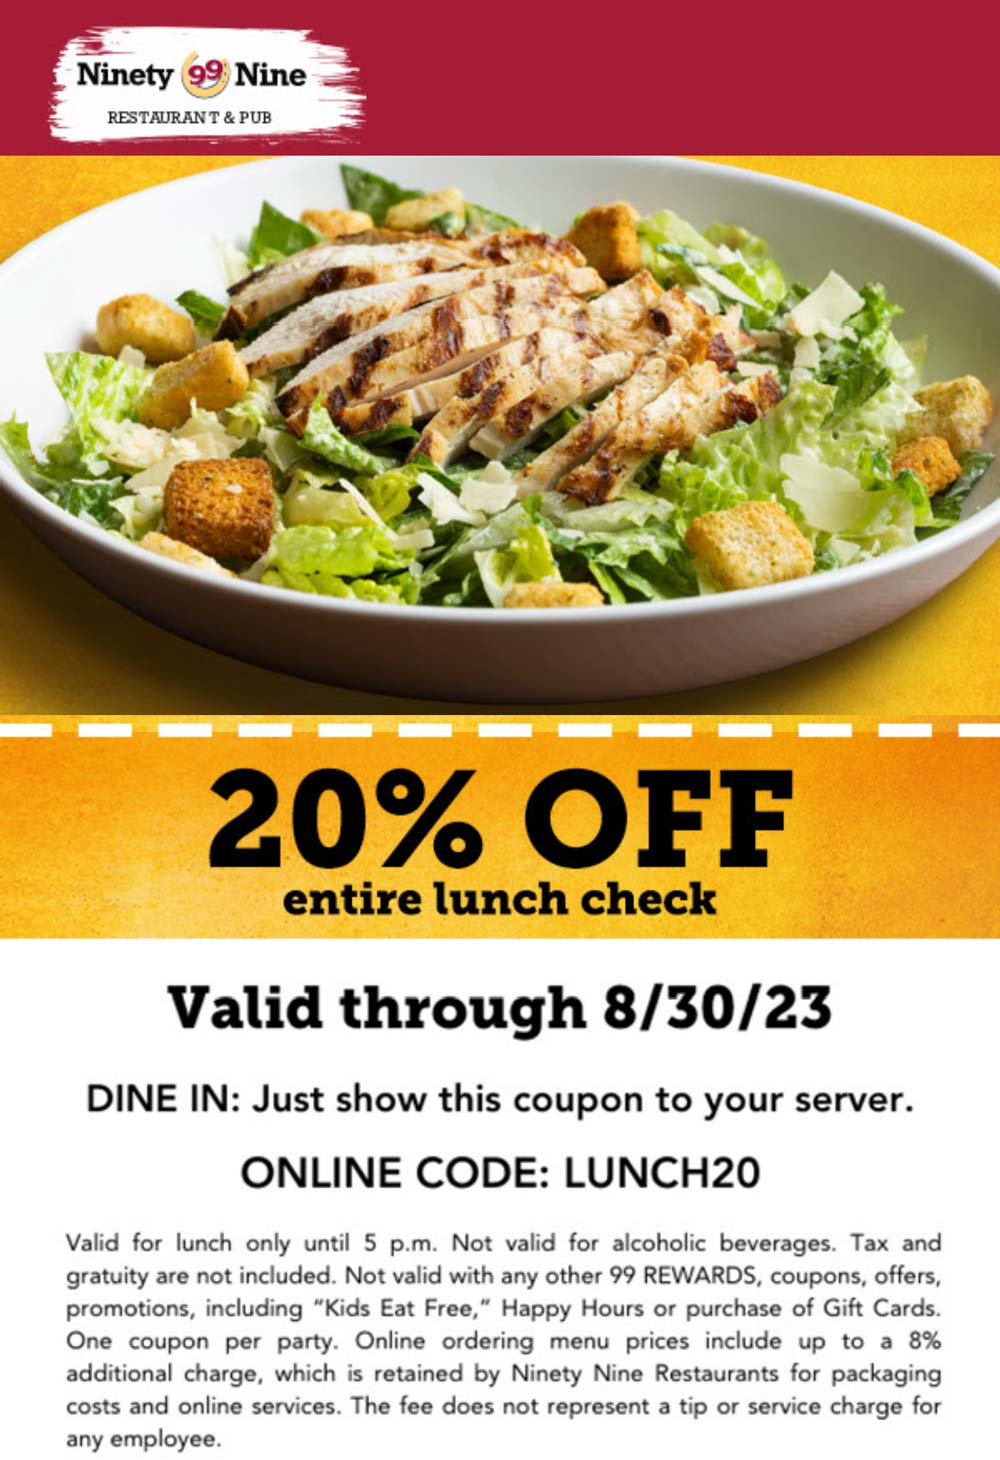 Ninety Nine restaurants Coupon  20% off lunch at Ninety Nine restaurants via promo code LUNCH20 #ninetynine 